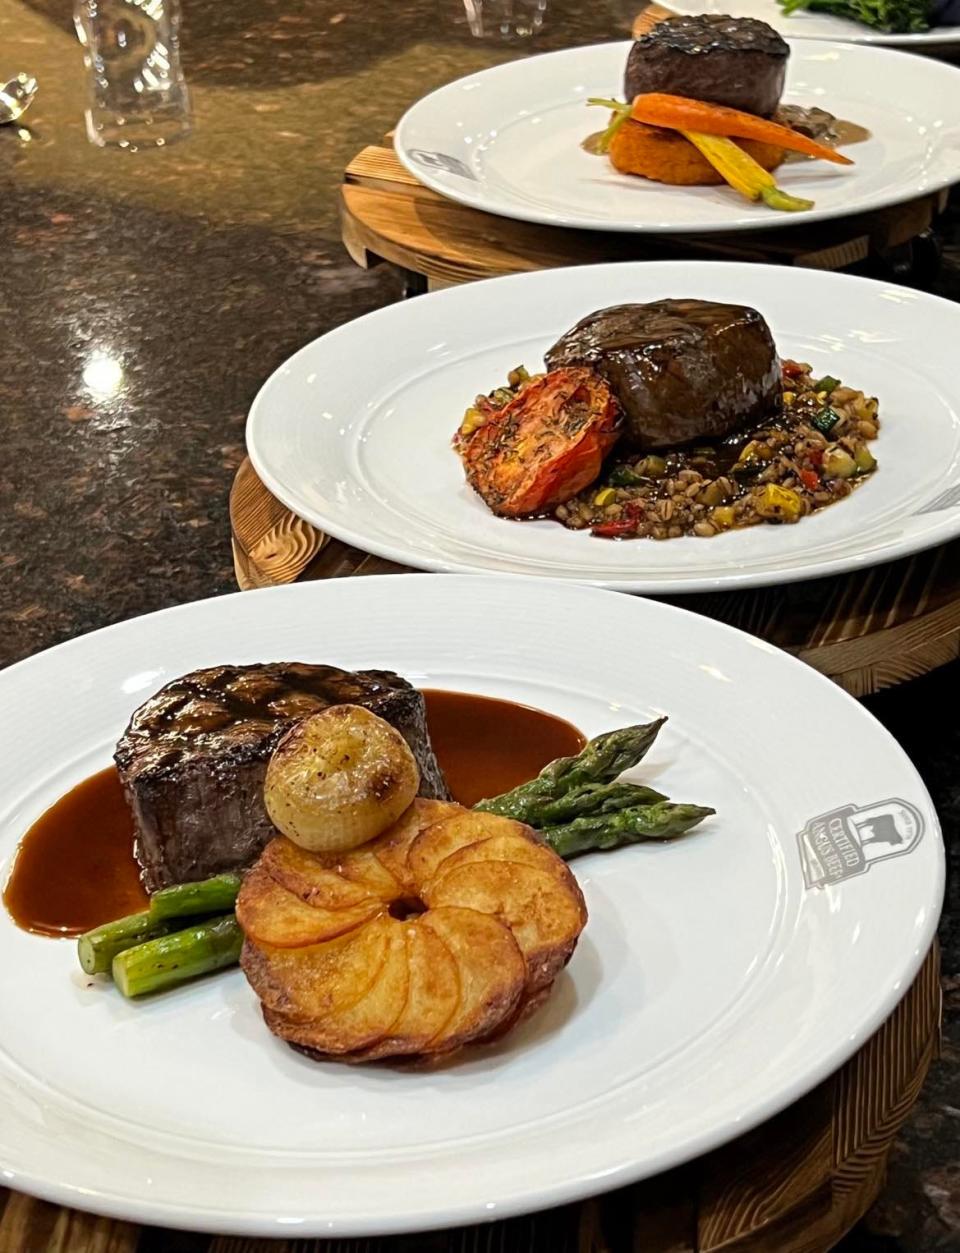 Steak and side dishes were prepared in the test kitchen of the Wooster-based Certified Angus Beef to determine what meal would be served at the Pro Football Hall of Fame Enshrinement Festival's Gold Jacket Dinner.